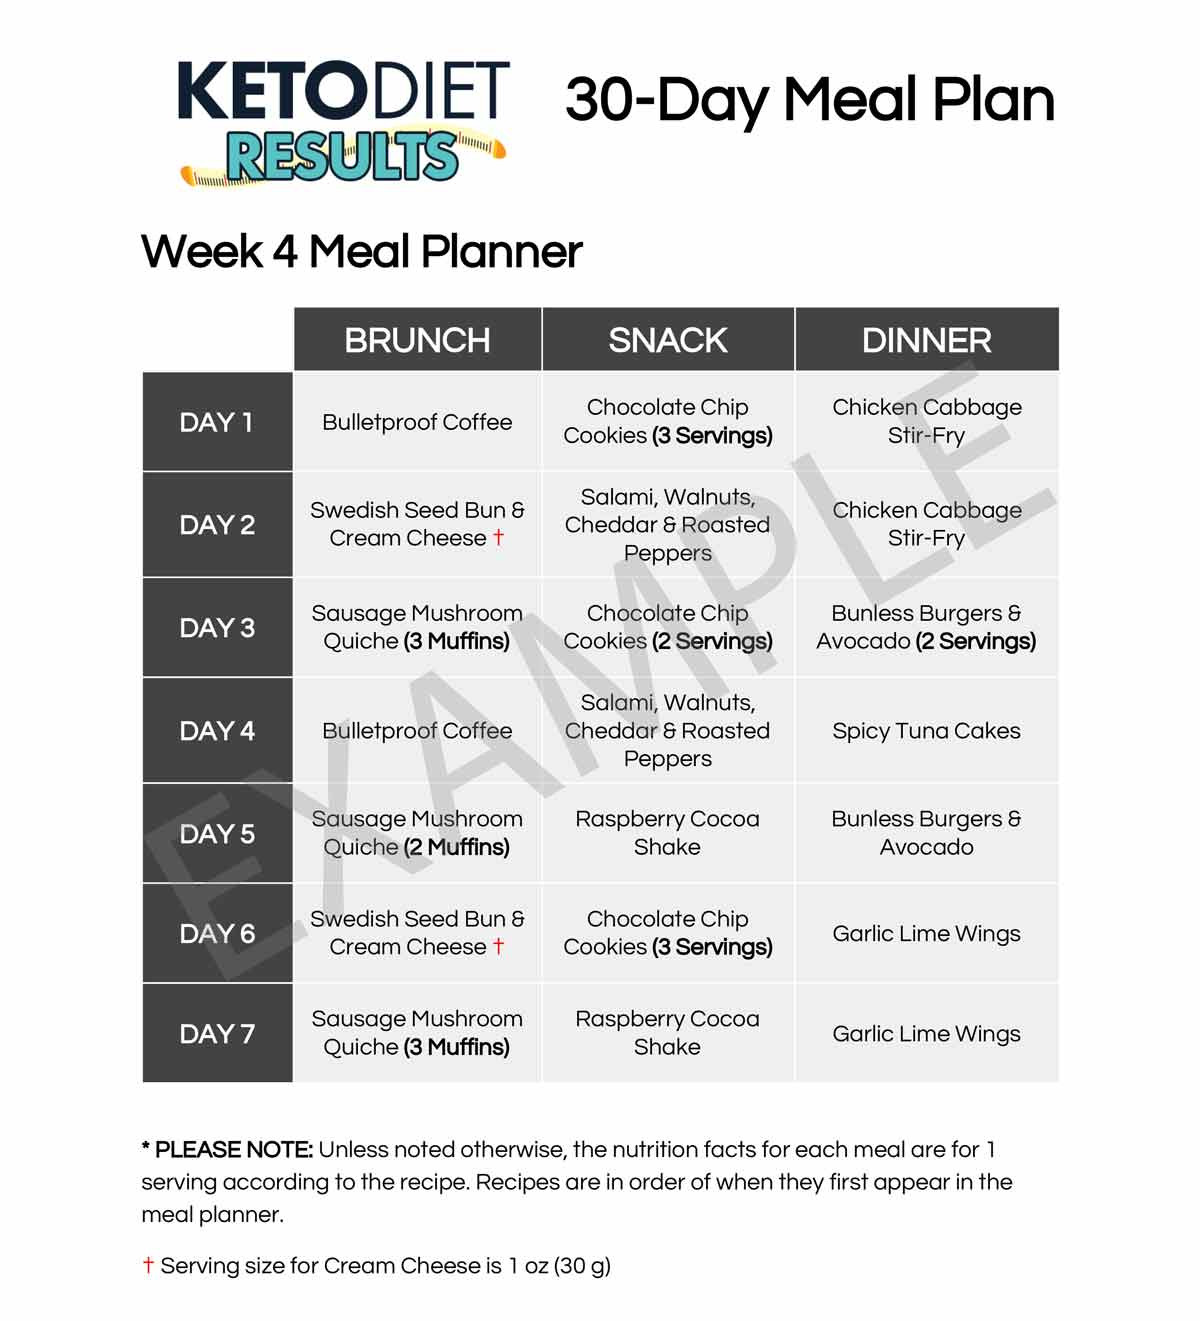 Keto Diet Plan Keto Diet Plans To Lose Weight For Women Lose Weight with This 30 Day Keto Meal Plan Keto Diet